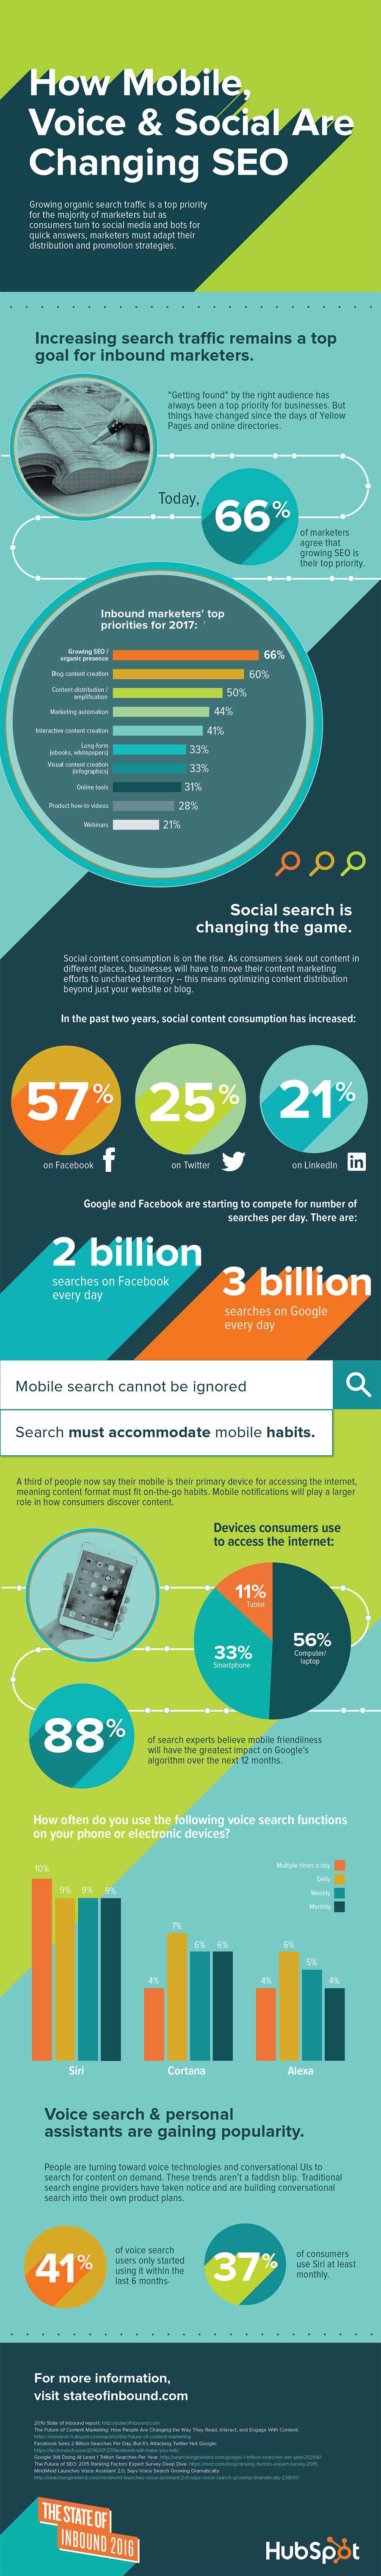 Mobile, Voice, and Social in SEO